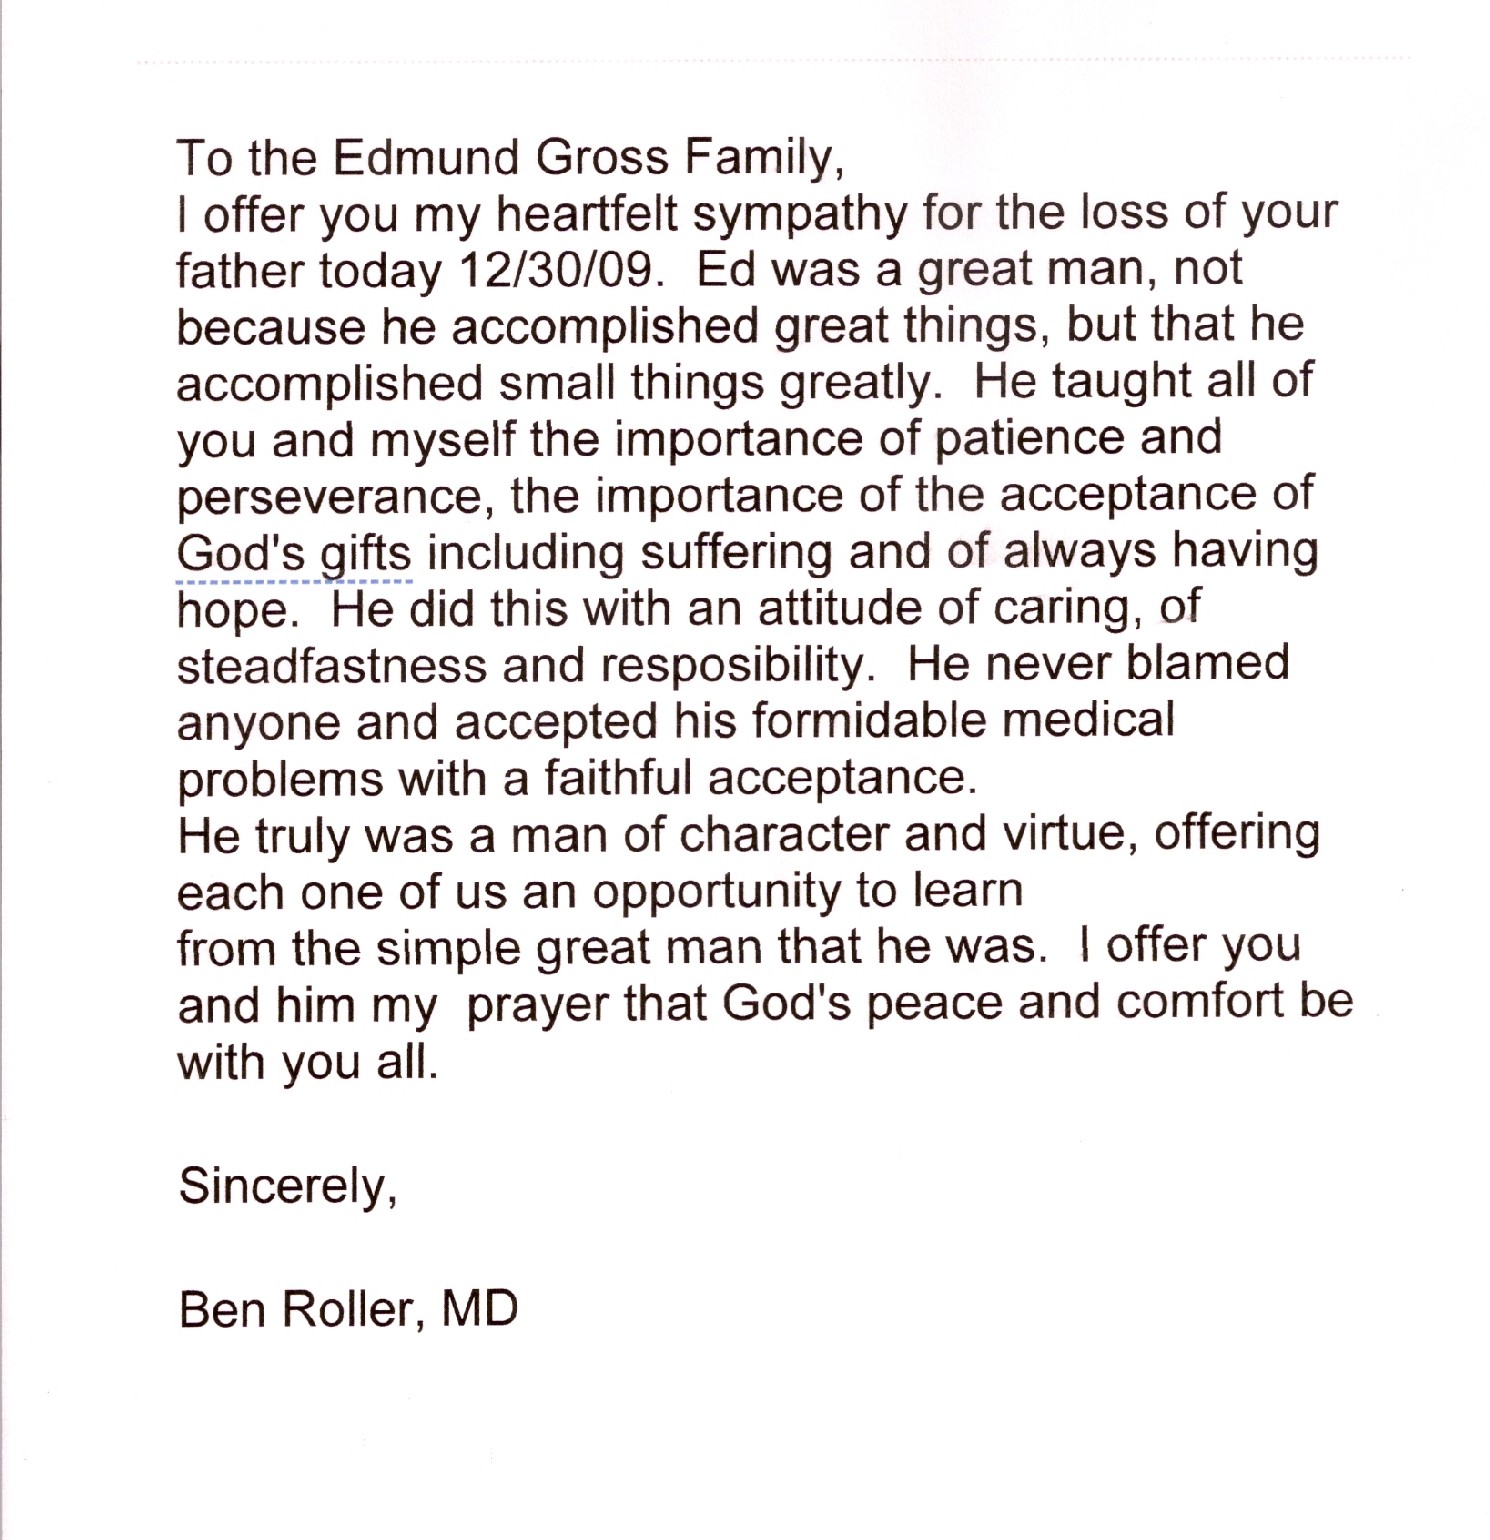 Letter from Ben Roller, MD to the Edmund Gross Family